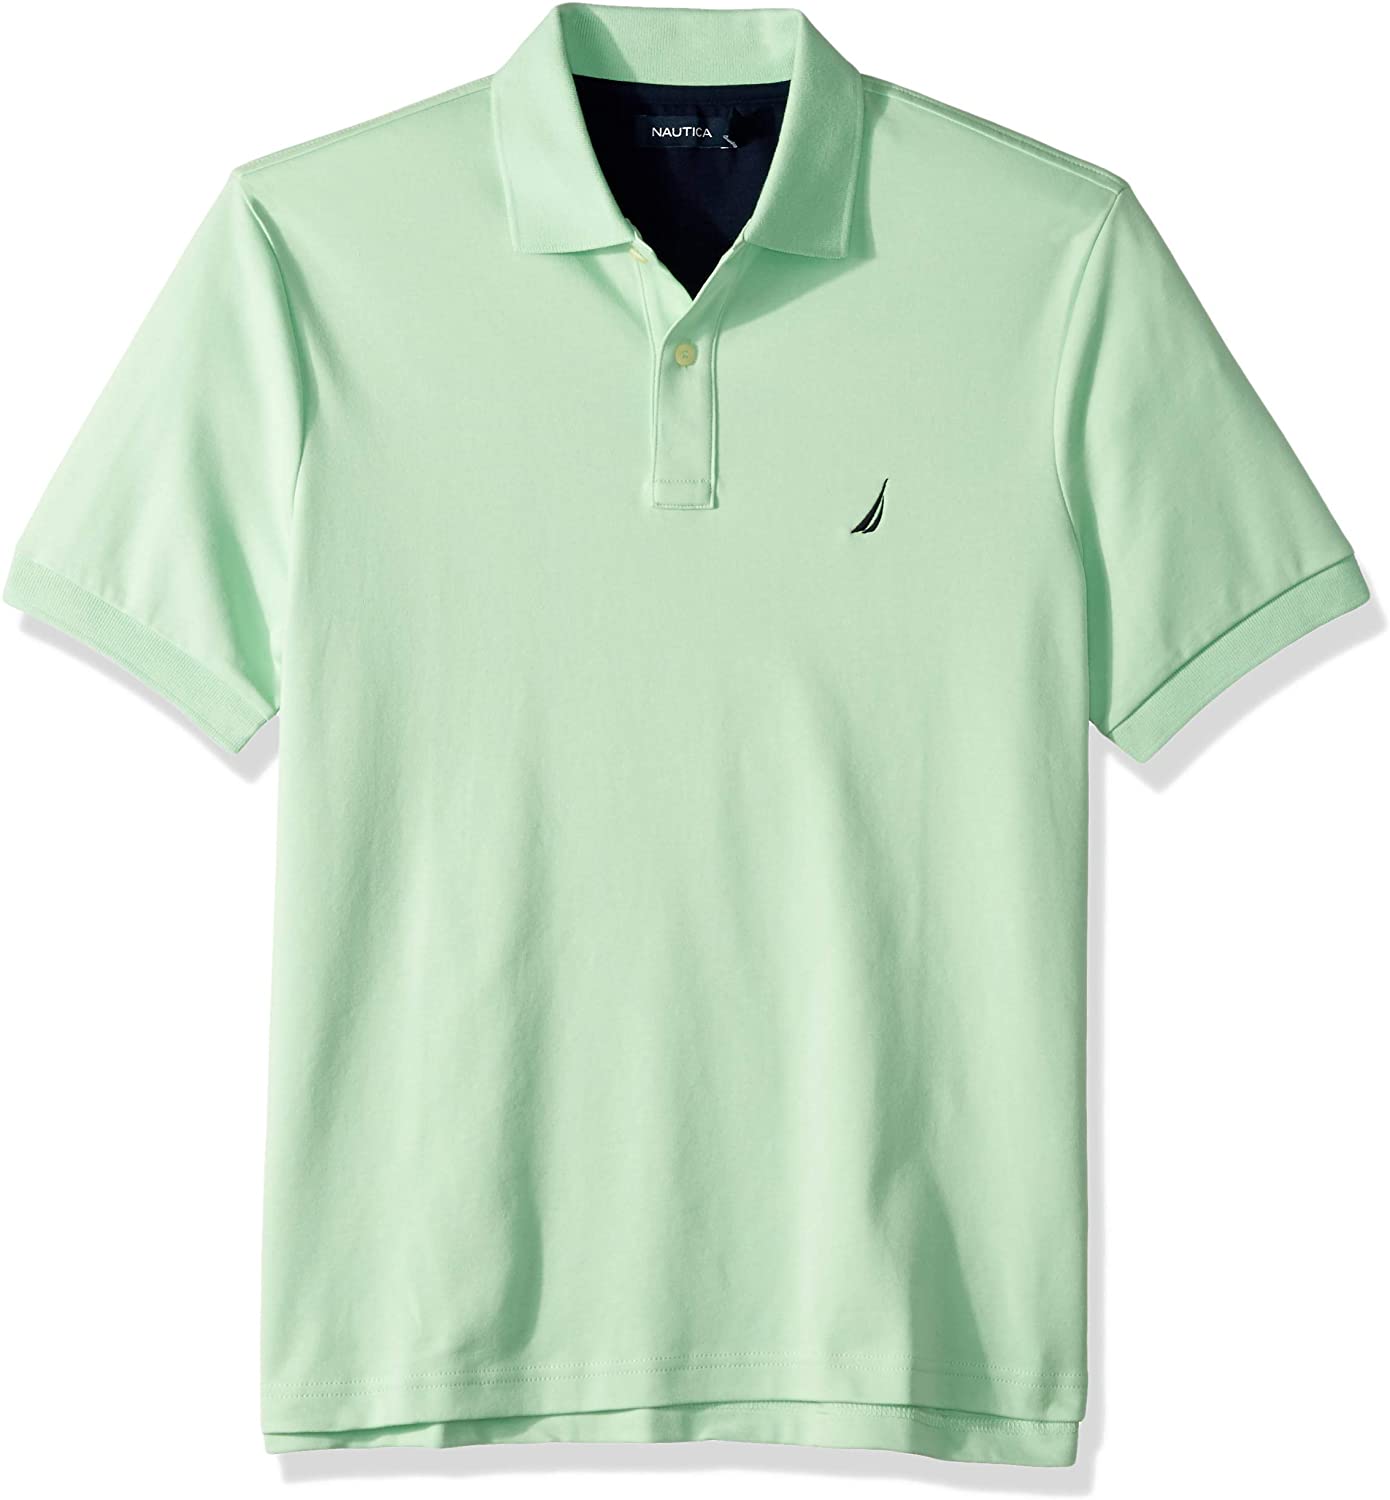 NAUTICA Mens Classic Fit Polo Shirt Large Green Striped Cotton, Vintage &  Second-Hand Clothing Online